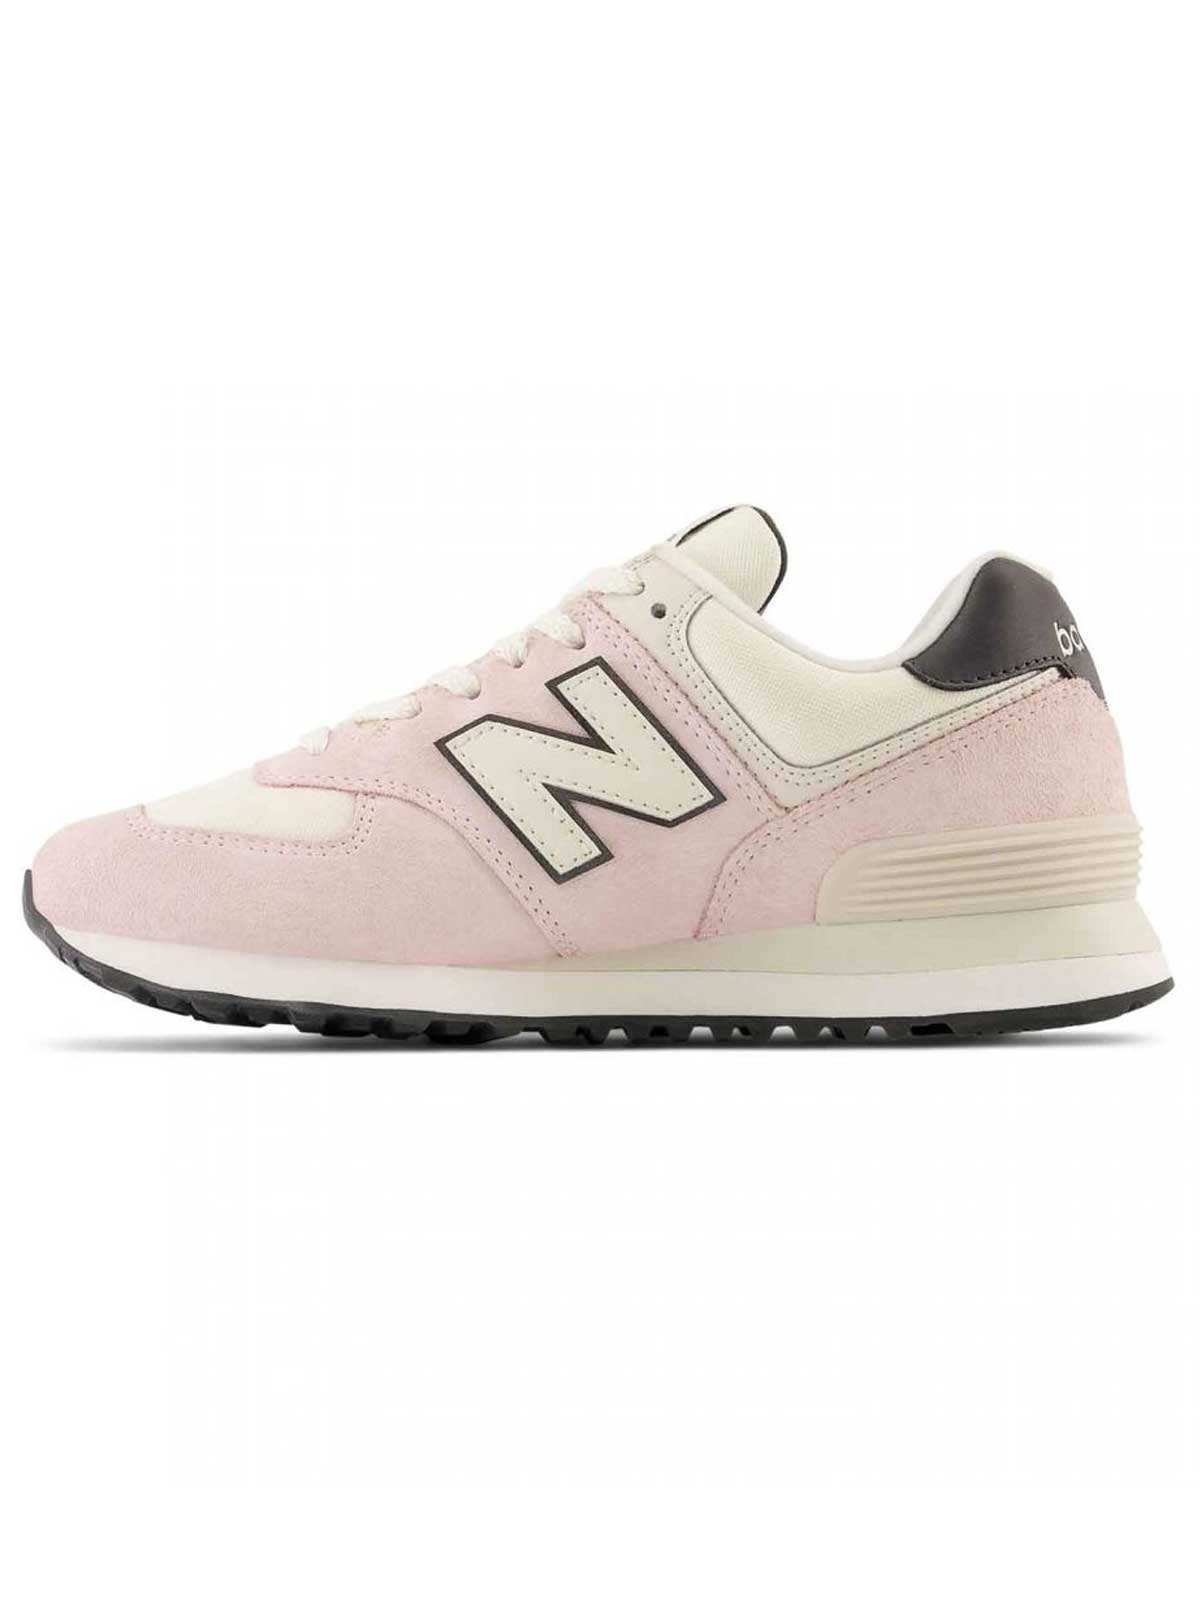   New Balance | 574 Lifestyle Sneakers |  